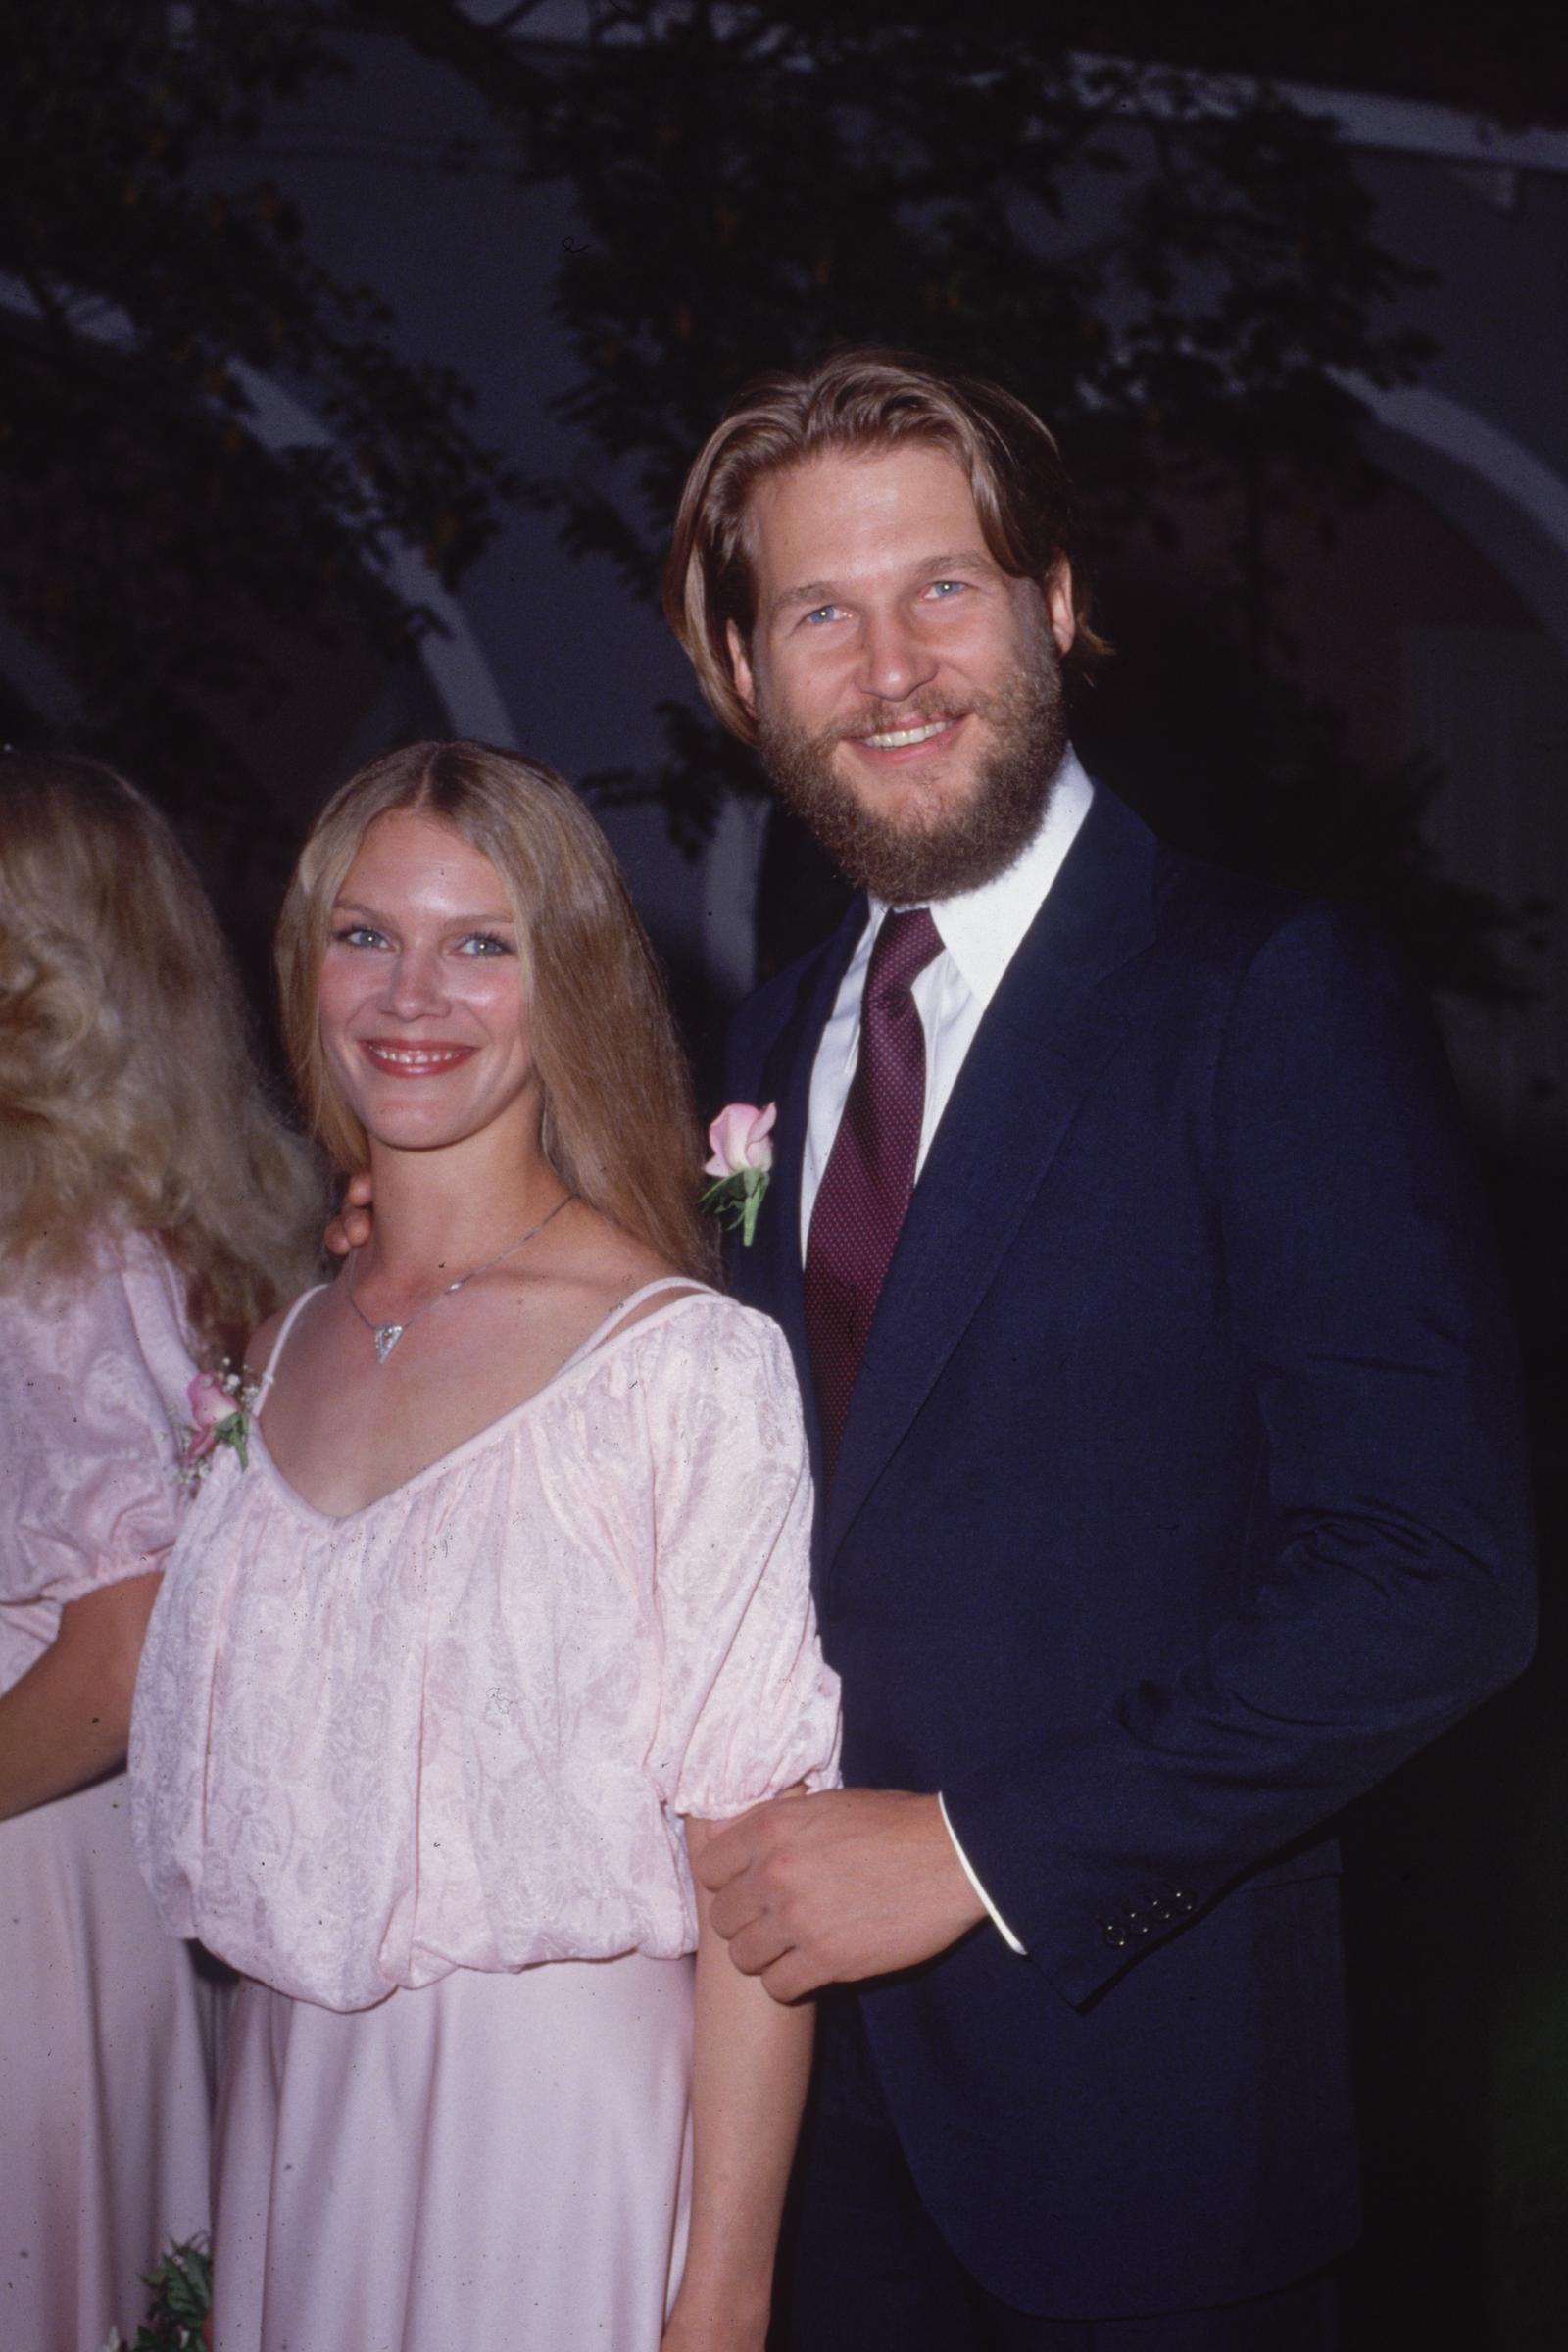 Susan Geston and Jeff Bridges at a formal event on January 1, 1978 | Source: Getty Images